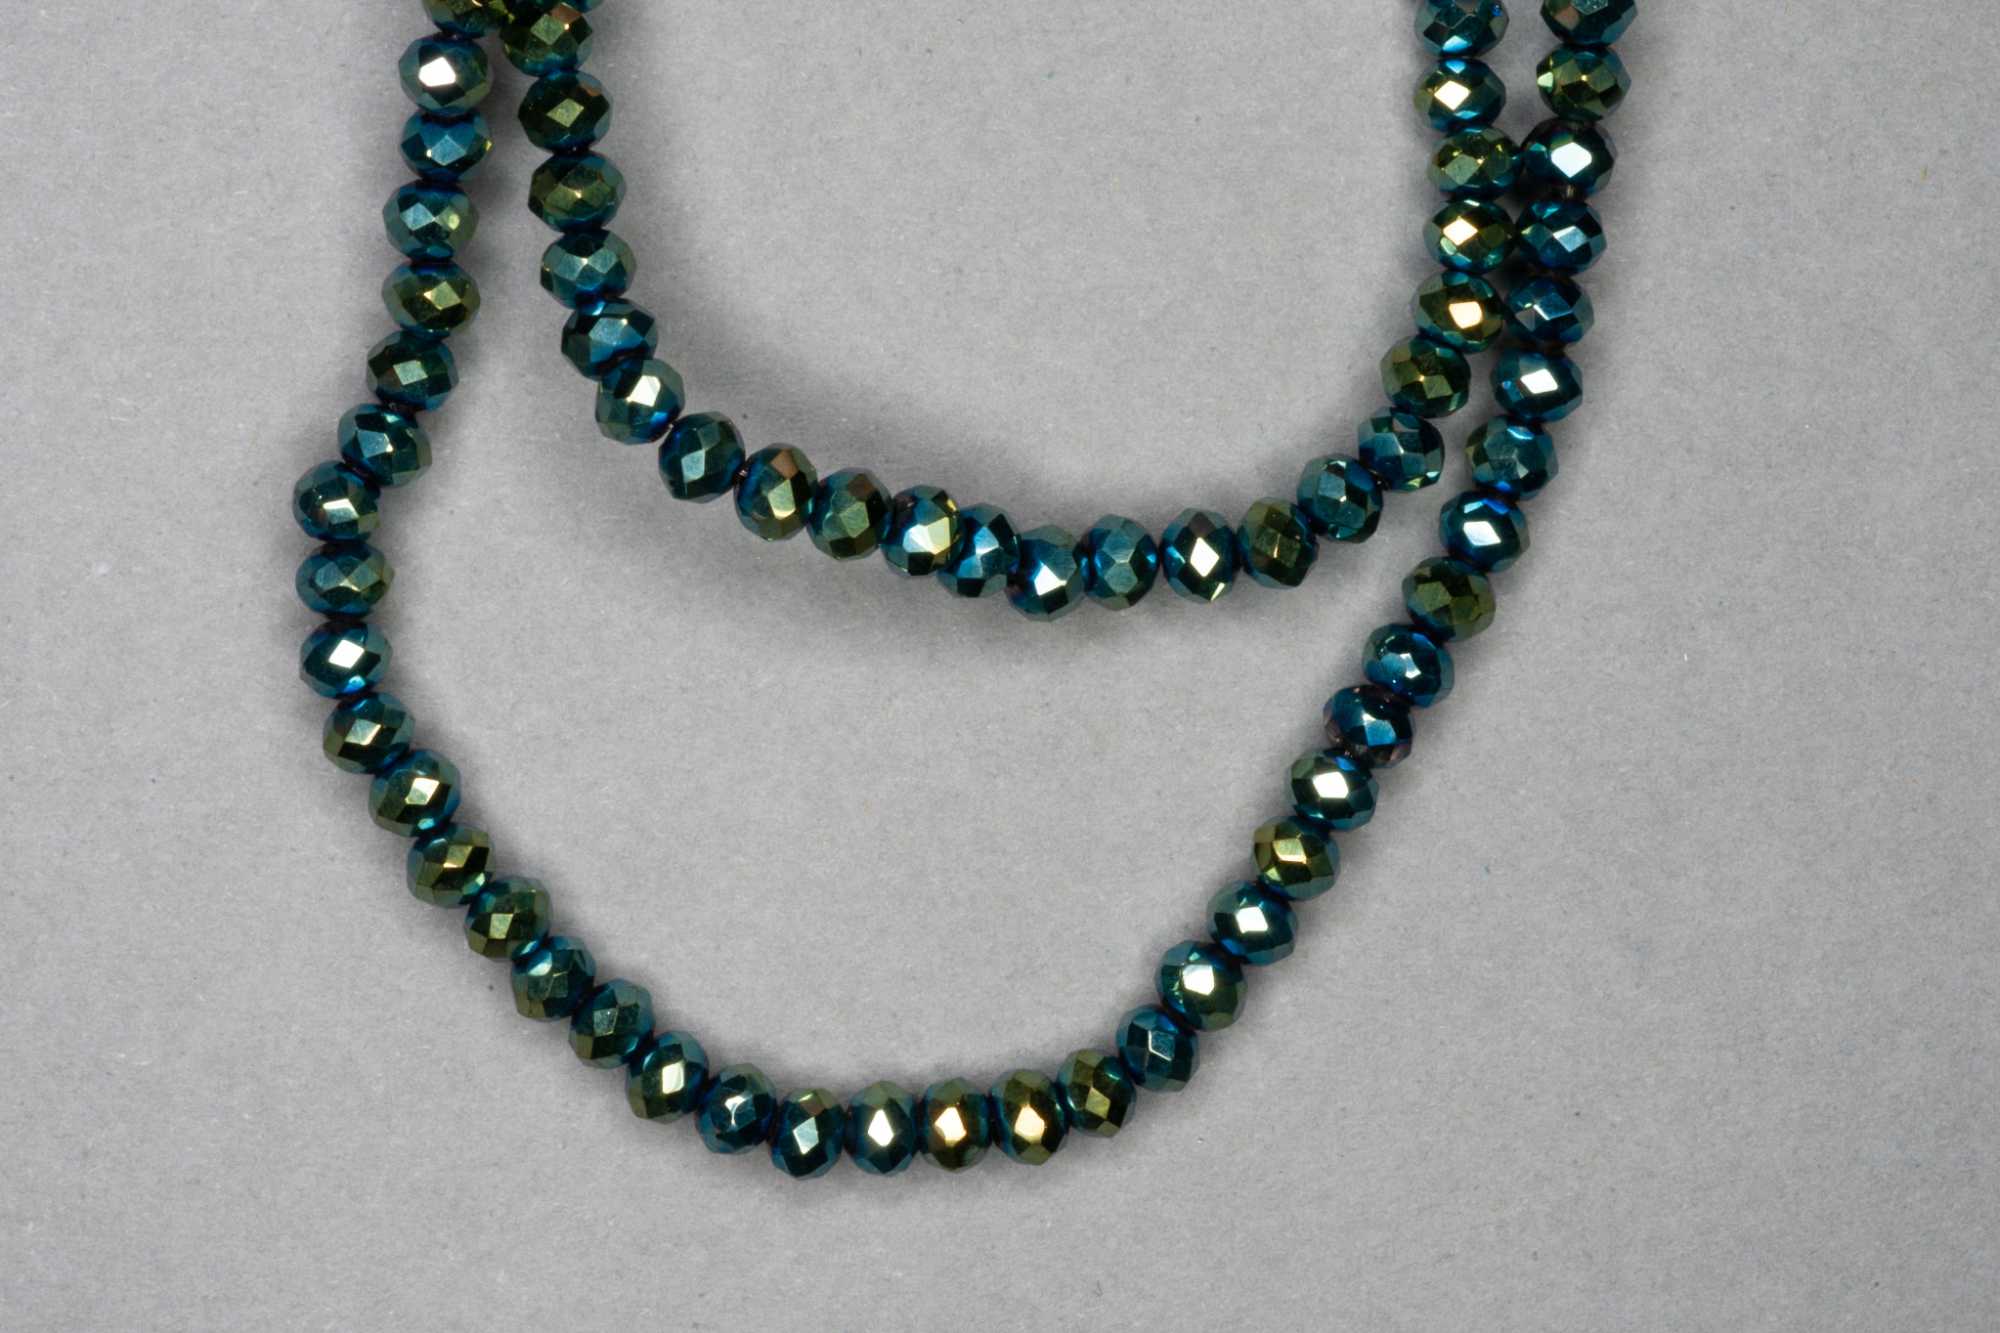 Metallic Teal Faceted Glass Beads